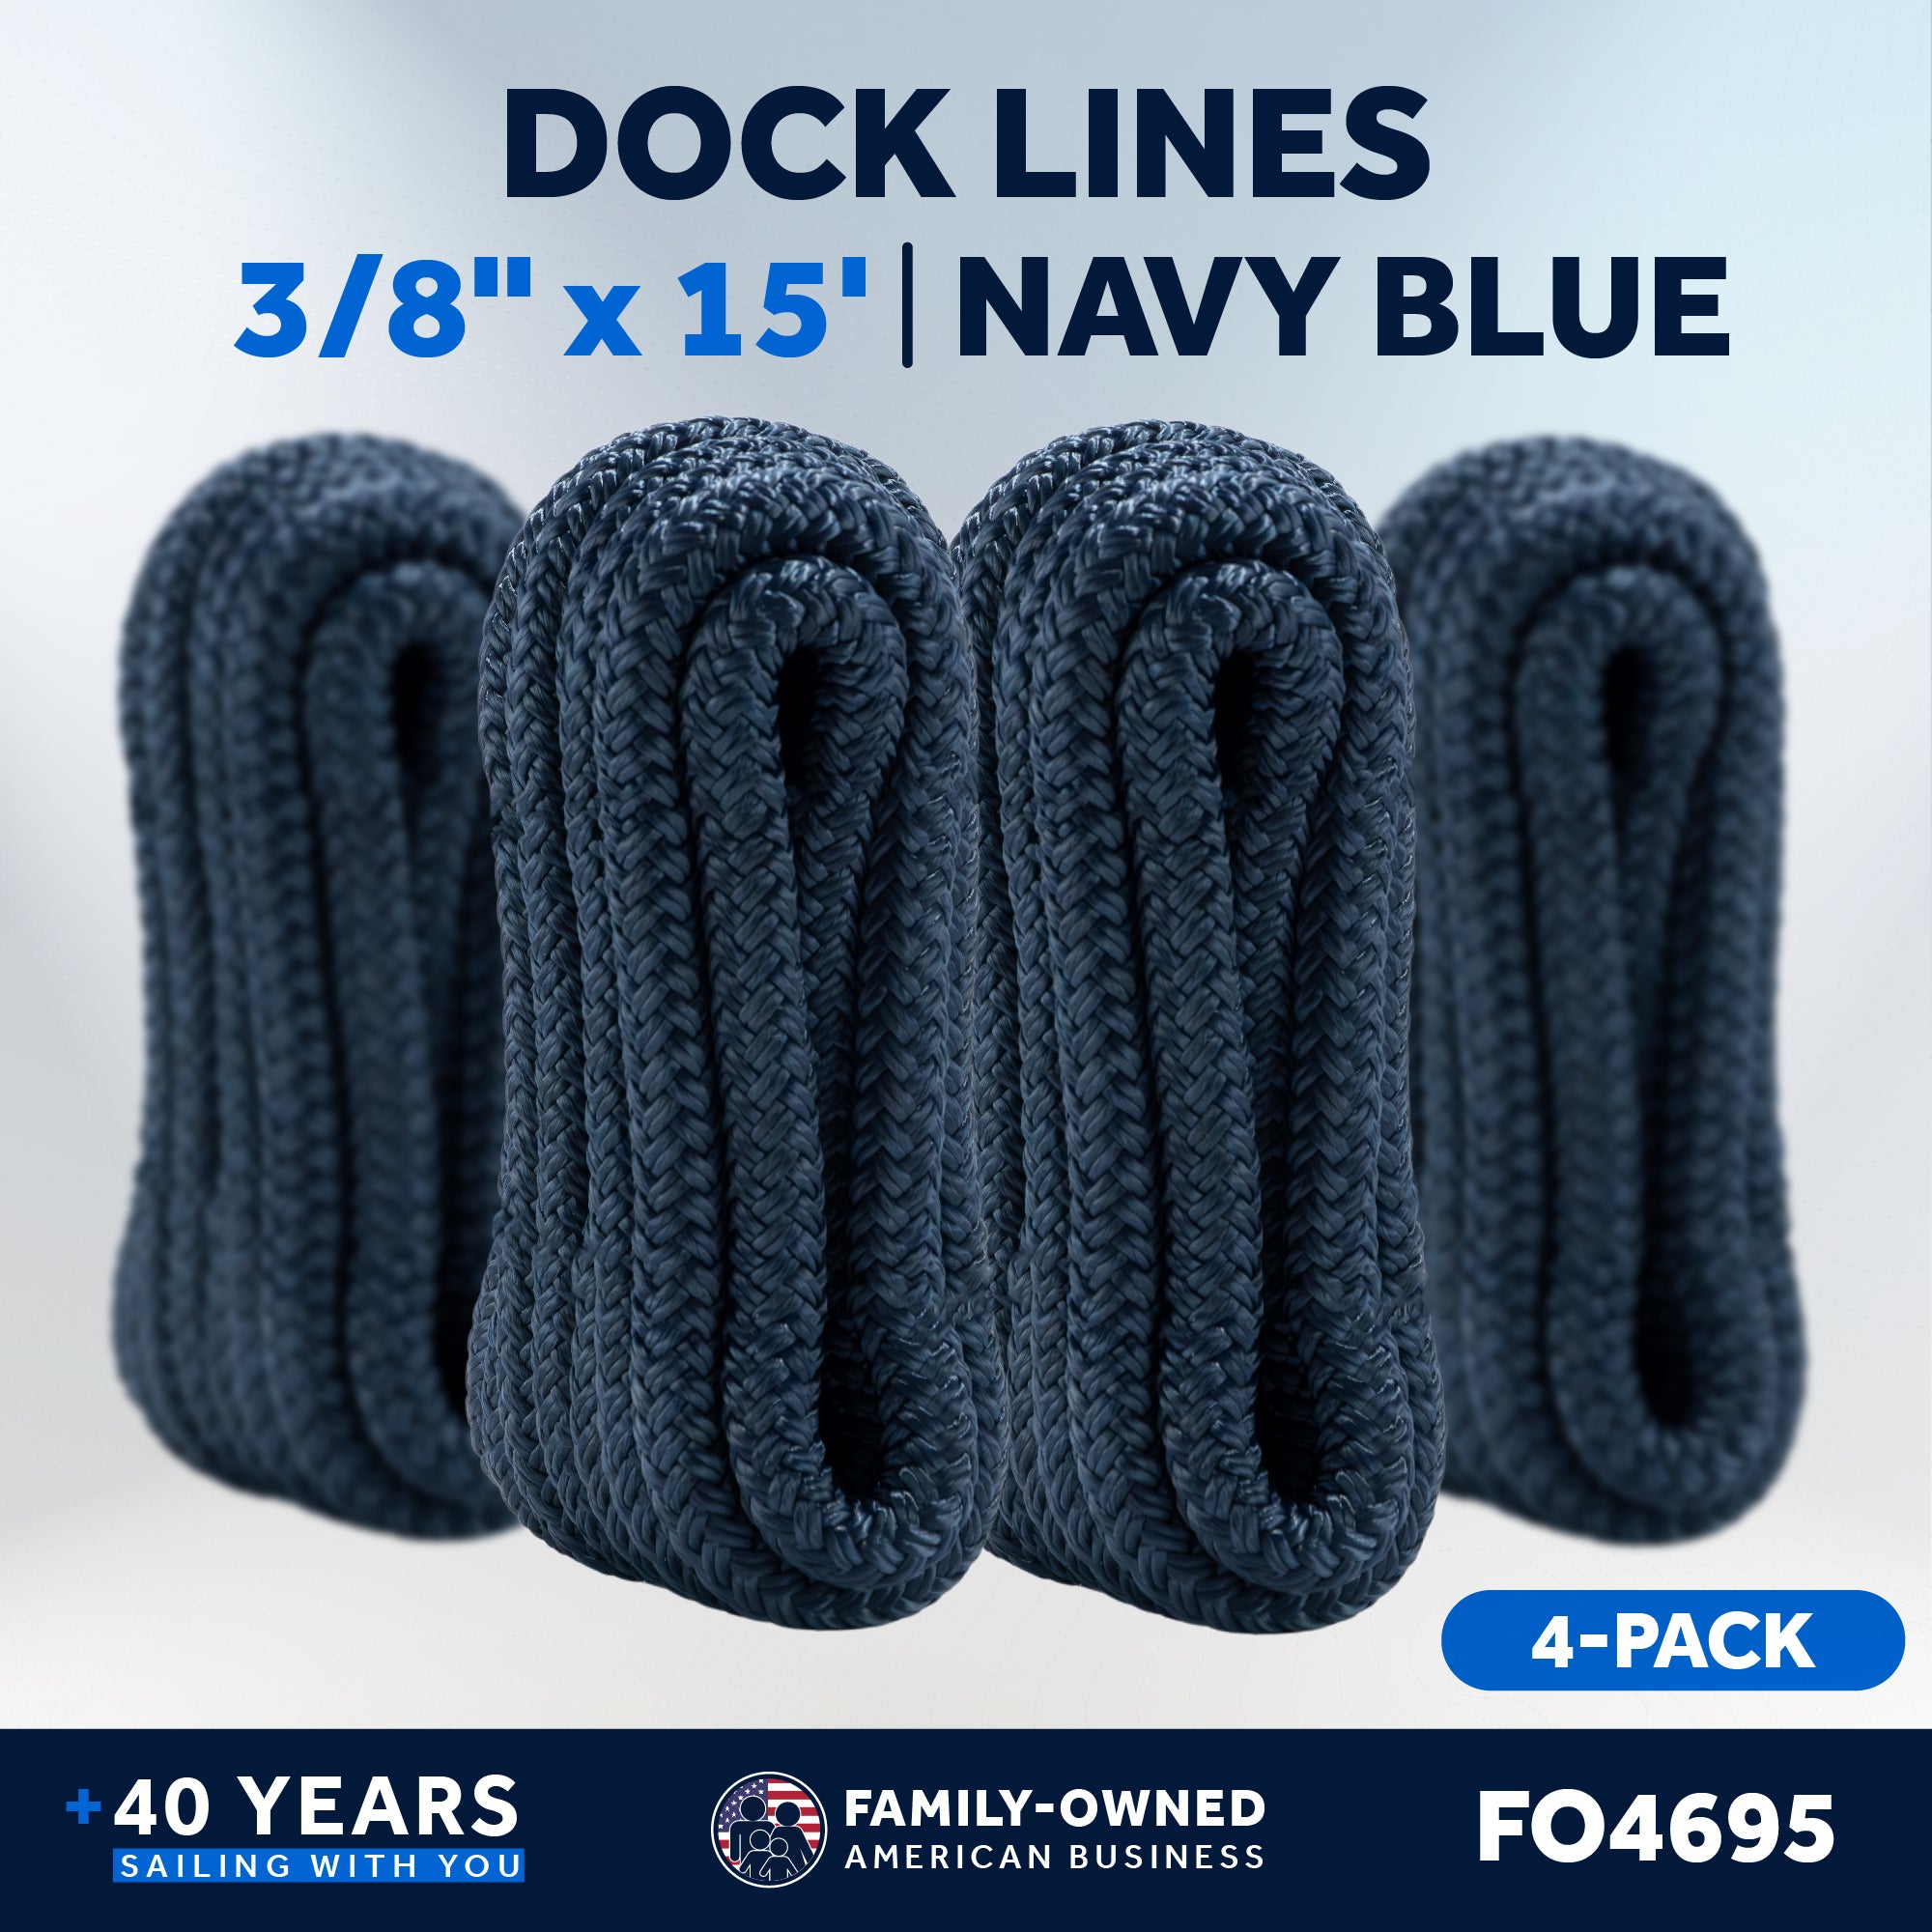 Five Oceans 4-Pack 3/8 inch x 15' Boat Dock Lines with 12 inch Eyelet, Marine-Grade Navy Blue Premium Double Braided Nylon Boat Rope 3/8 inch, Boat